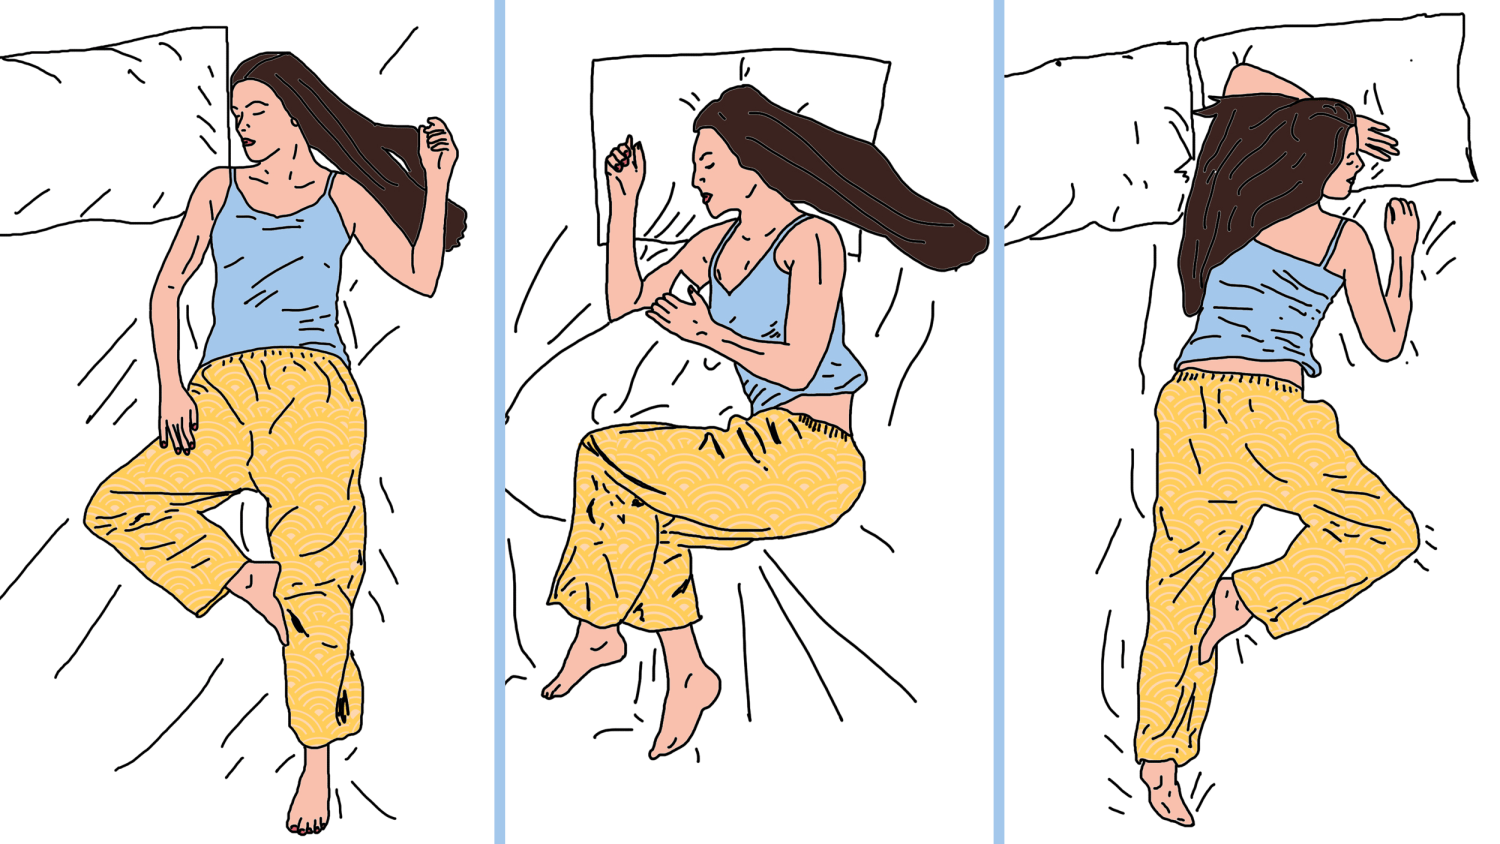 Choosing the best sleep position for you: Back, stomach or side?